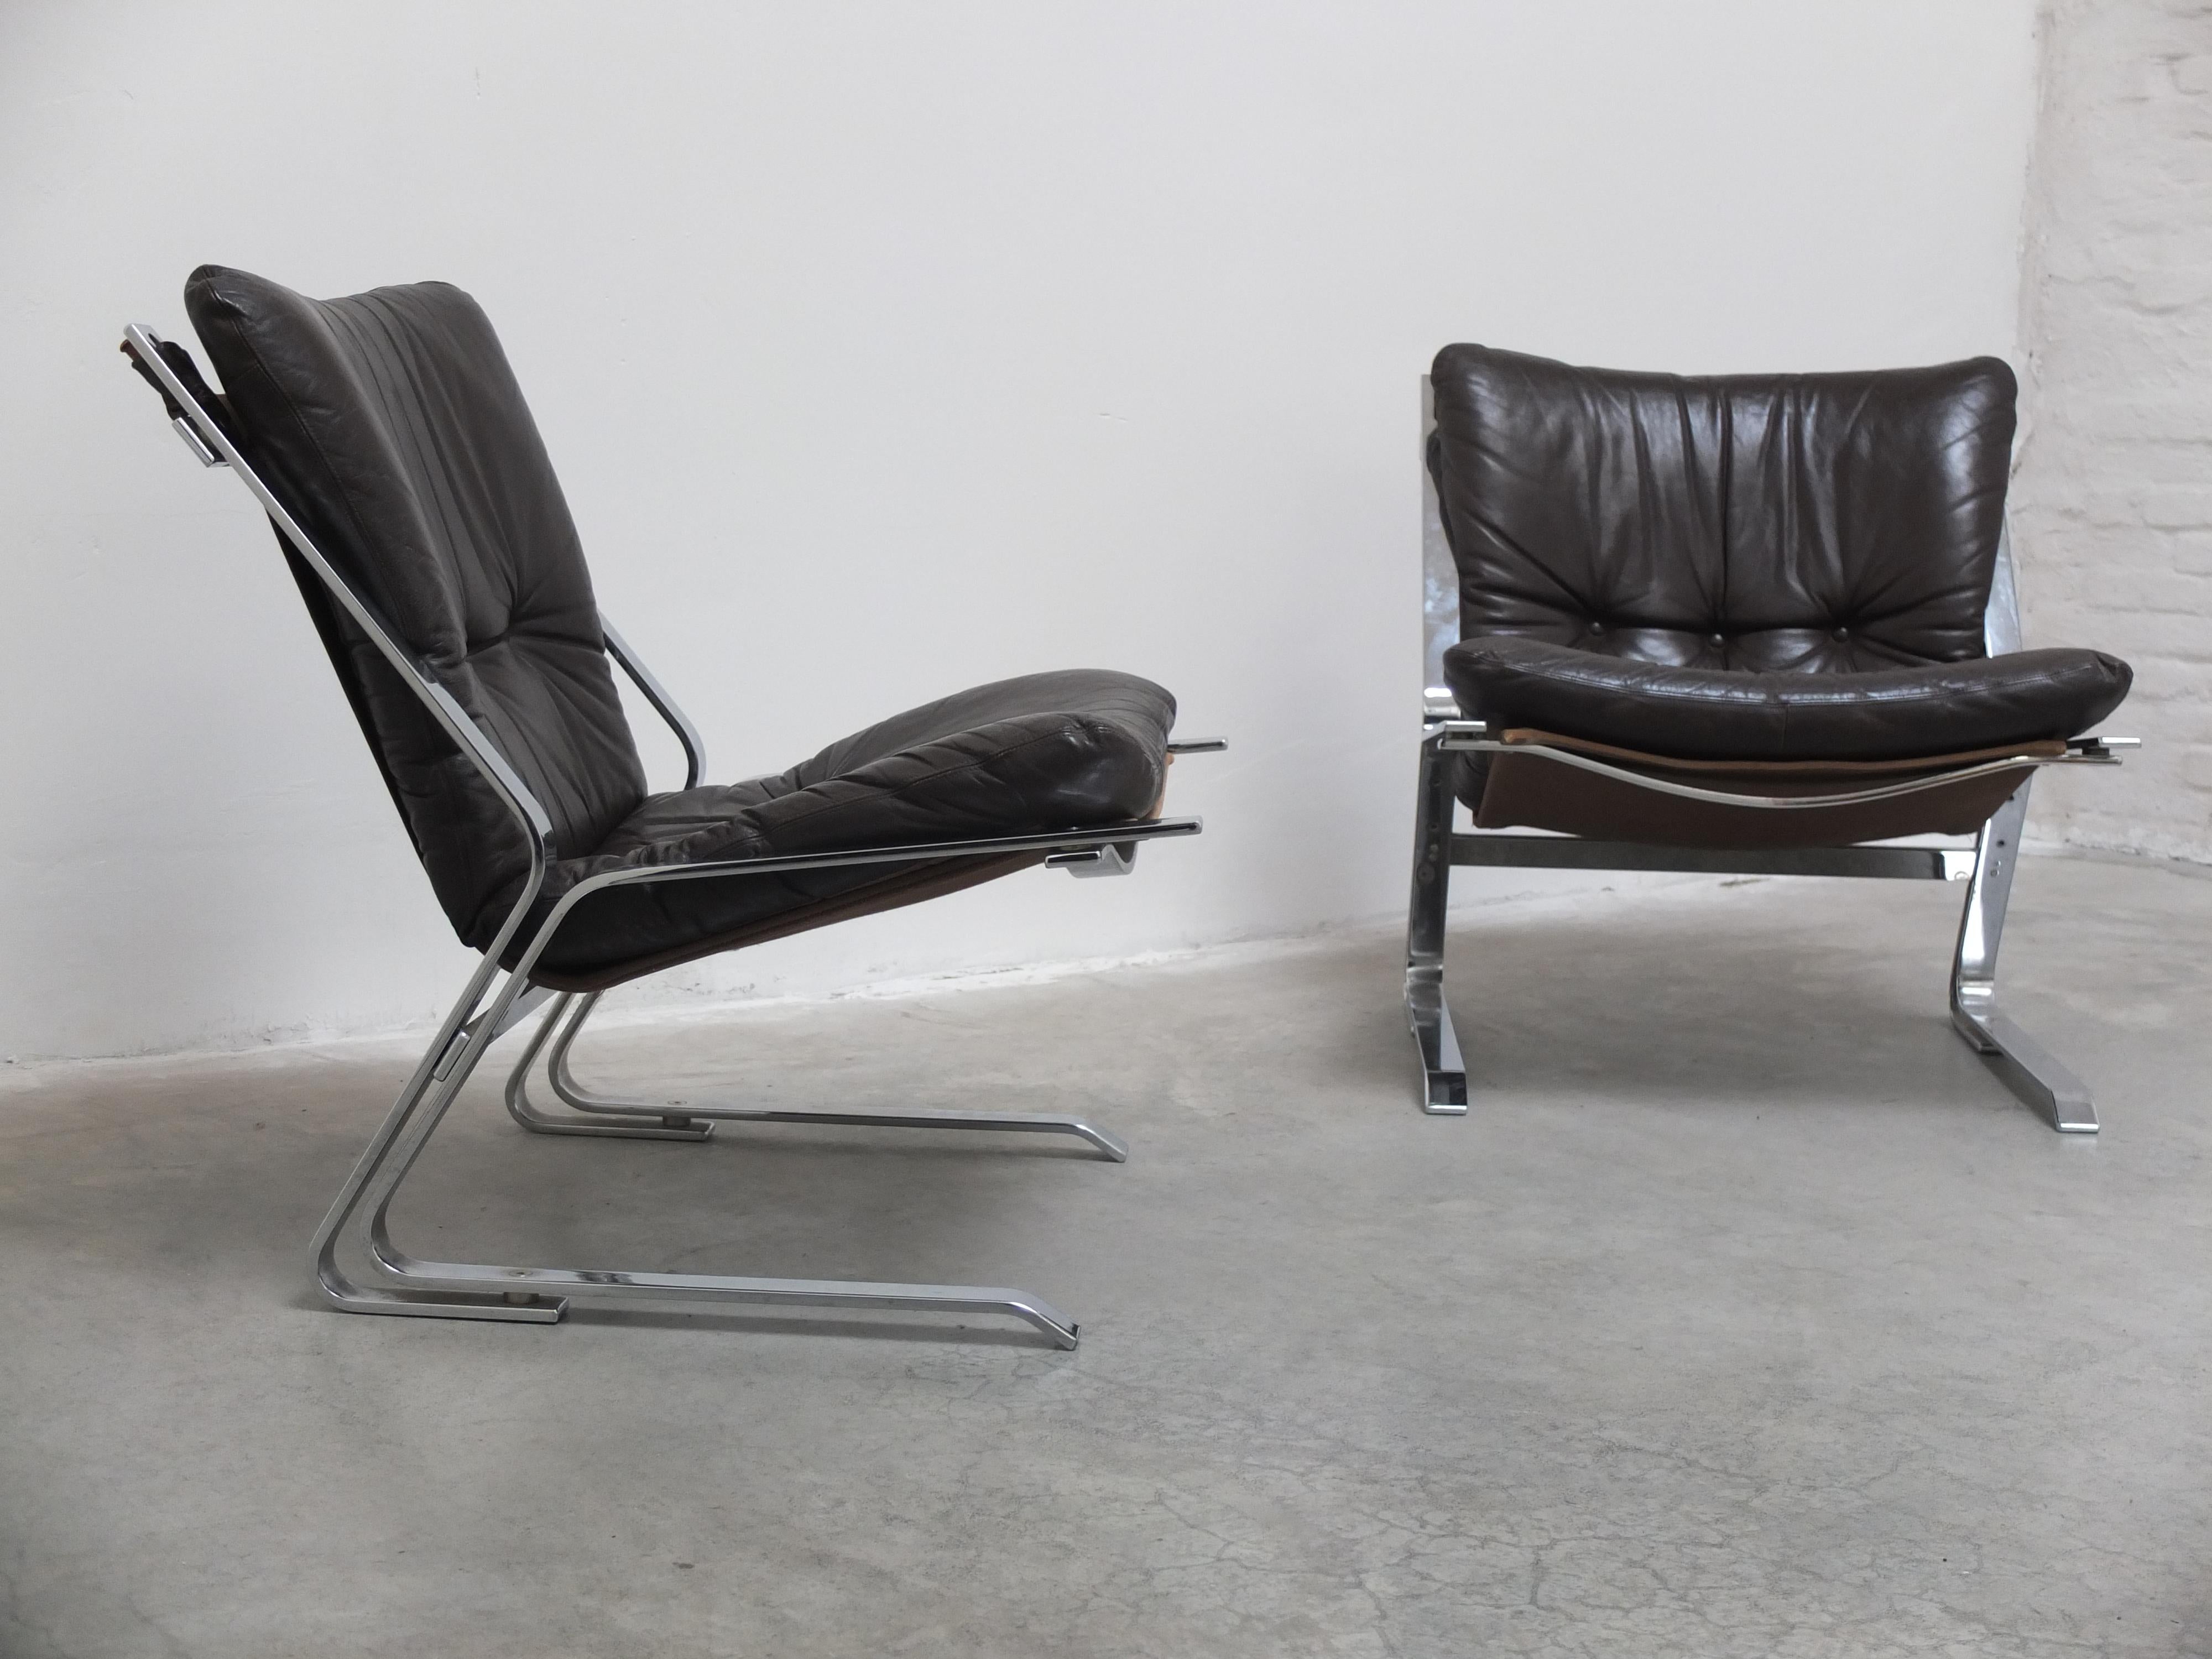 Metal Rare Pair of 'Pirate' Lounge Chairs by Elsa & Nordahl Solheim for Rykken, 1960s For Sale